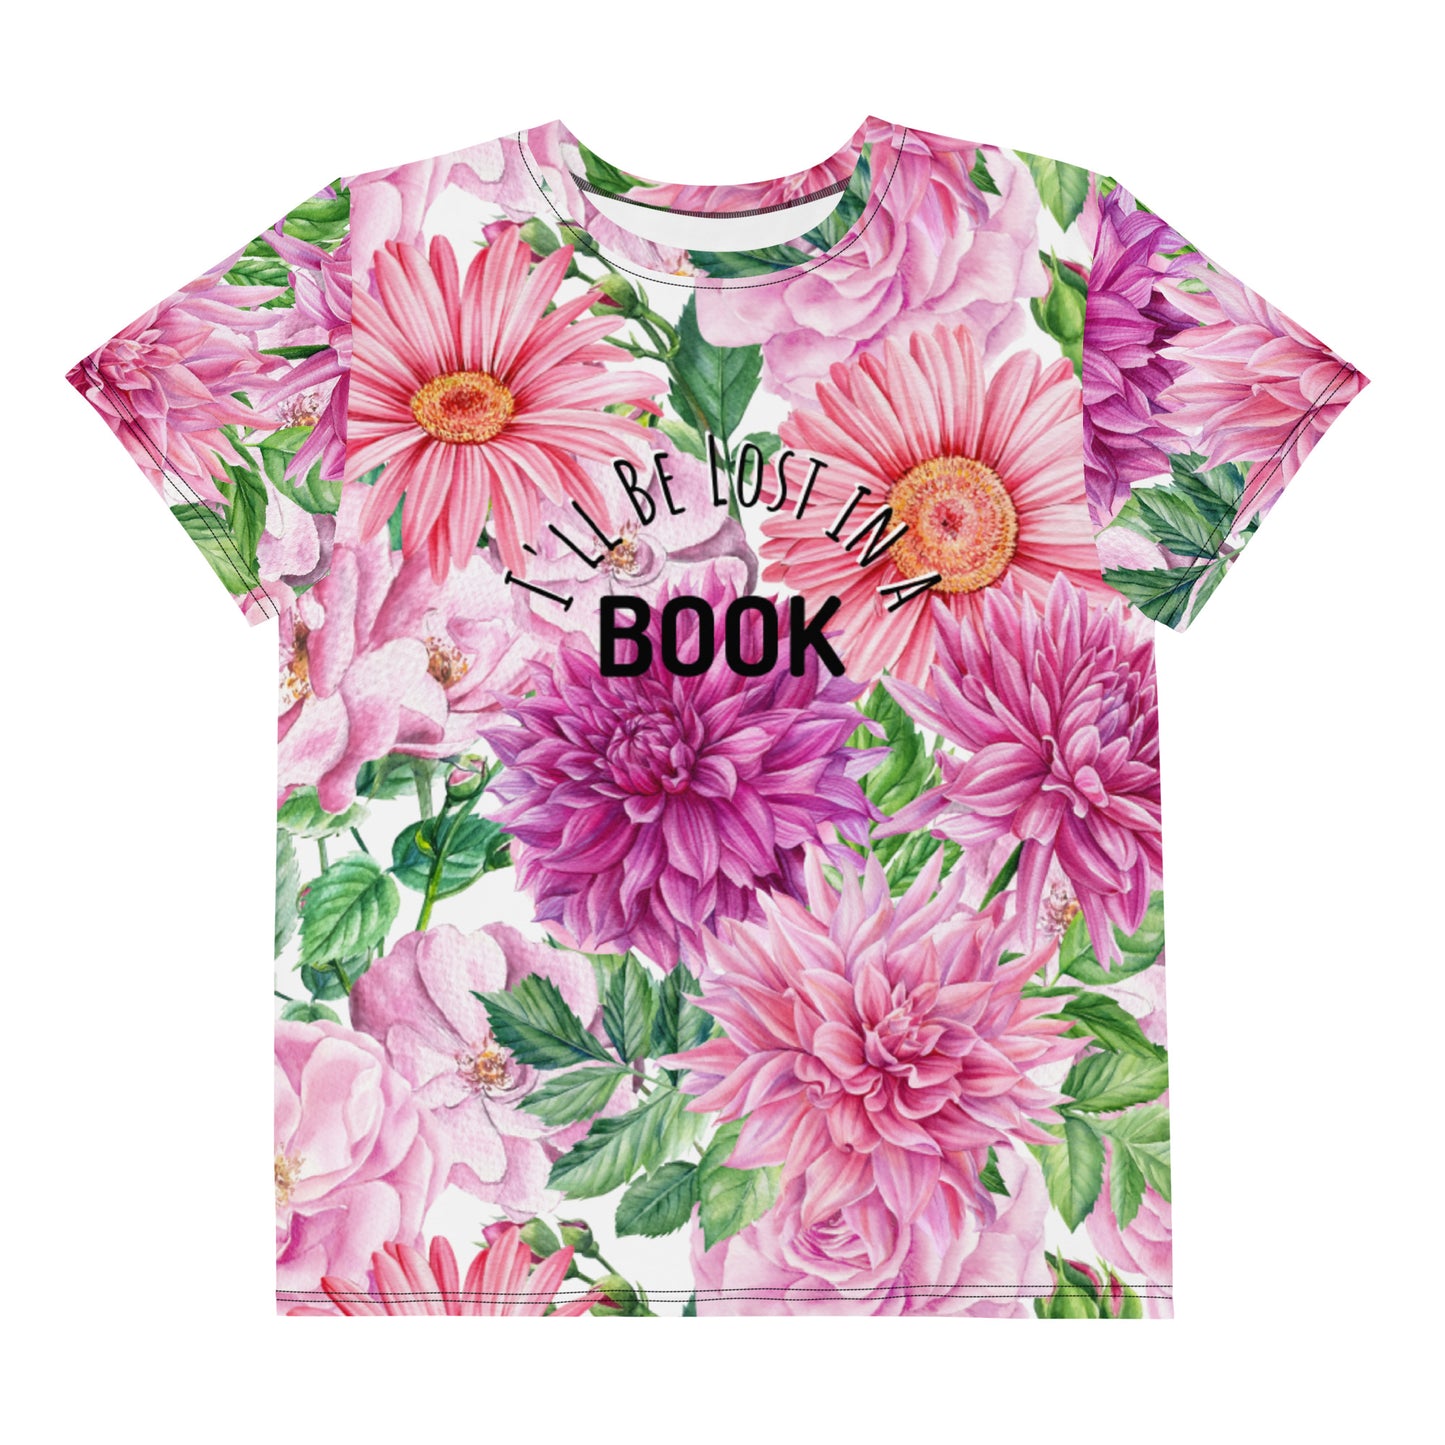 Avid Reader - I'll be Lost in a Book - Floral Dreamy Tee